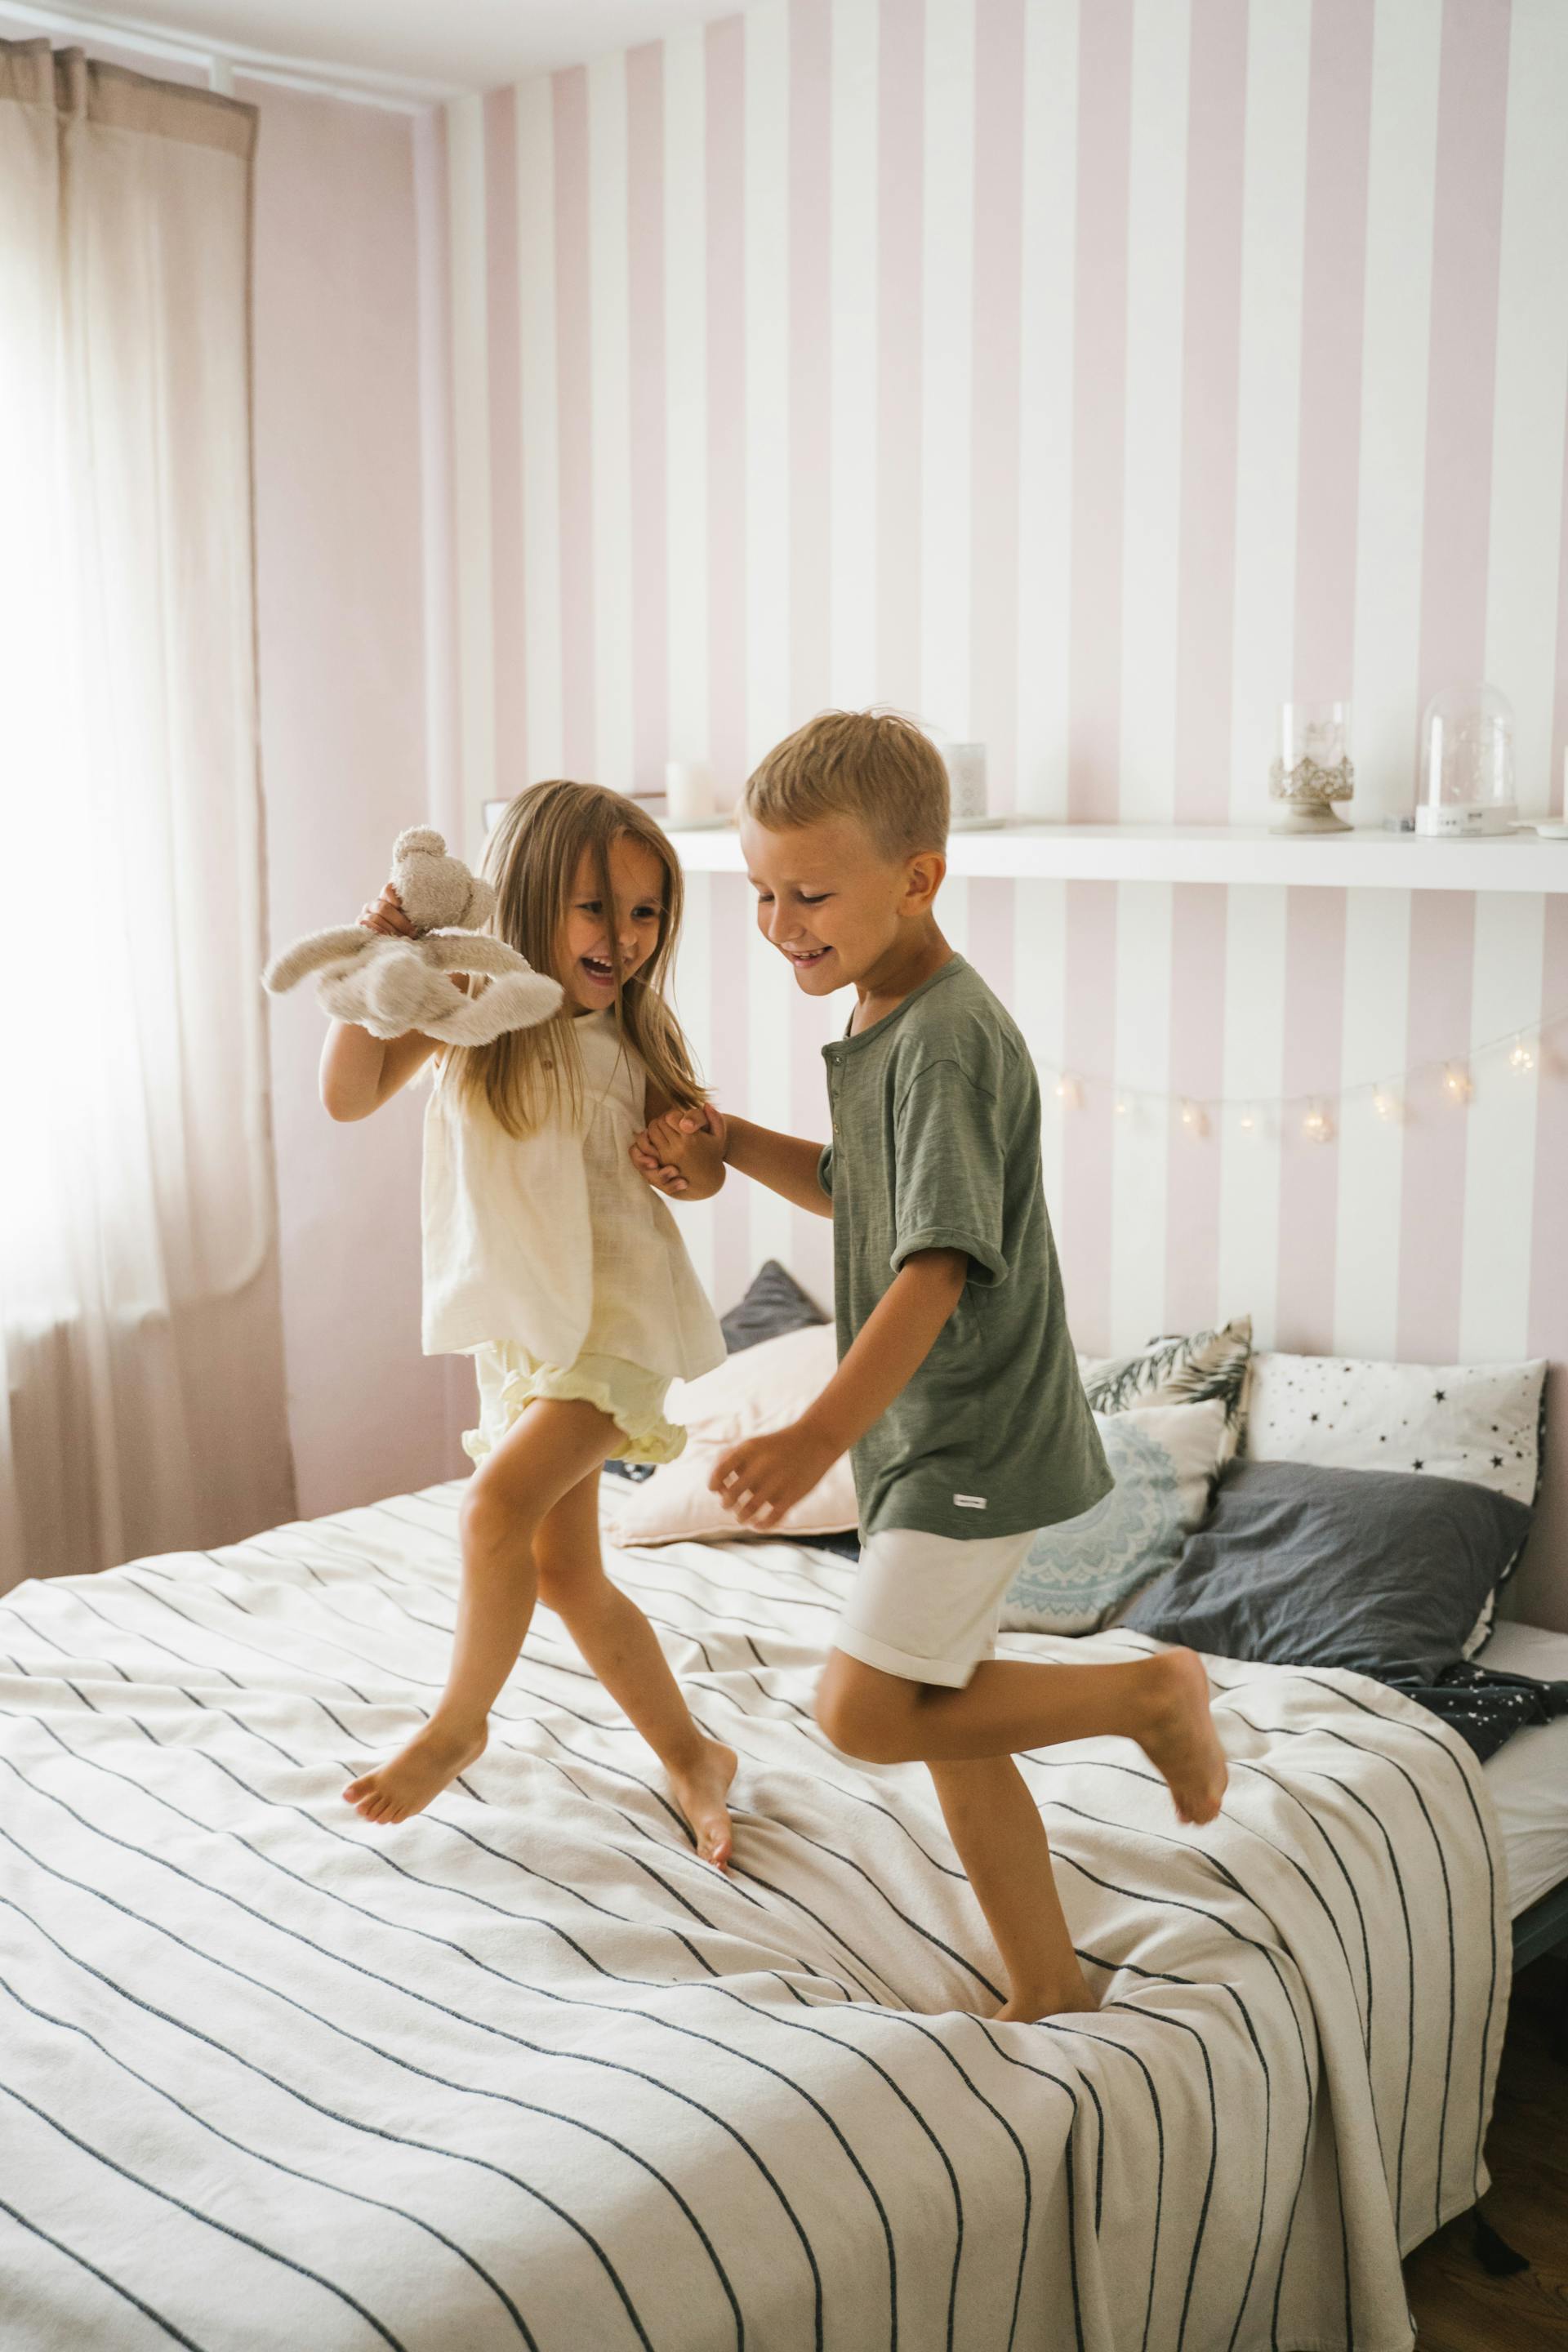 A happy boy and girl dancing on the bed | Source: Pexels